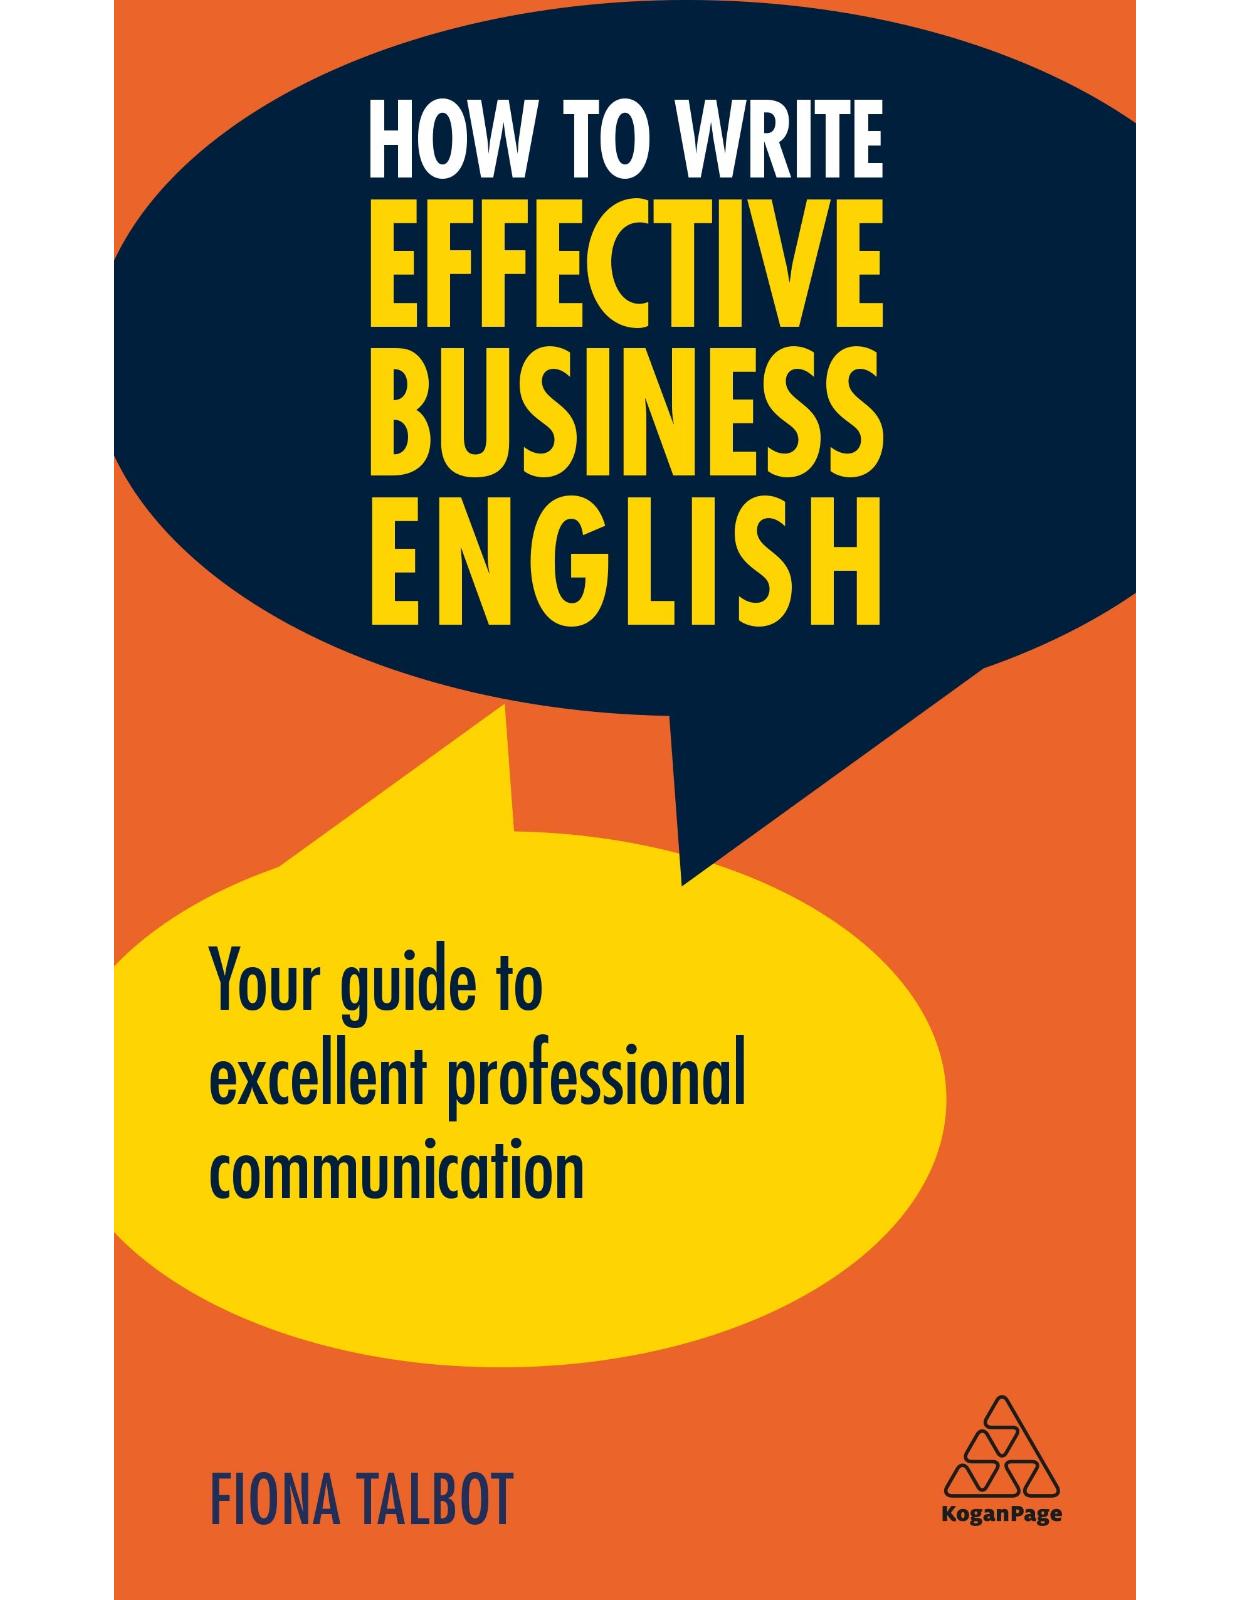 How to Write Effective Business English: Your Guide to Excellent Professional Communication